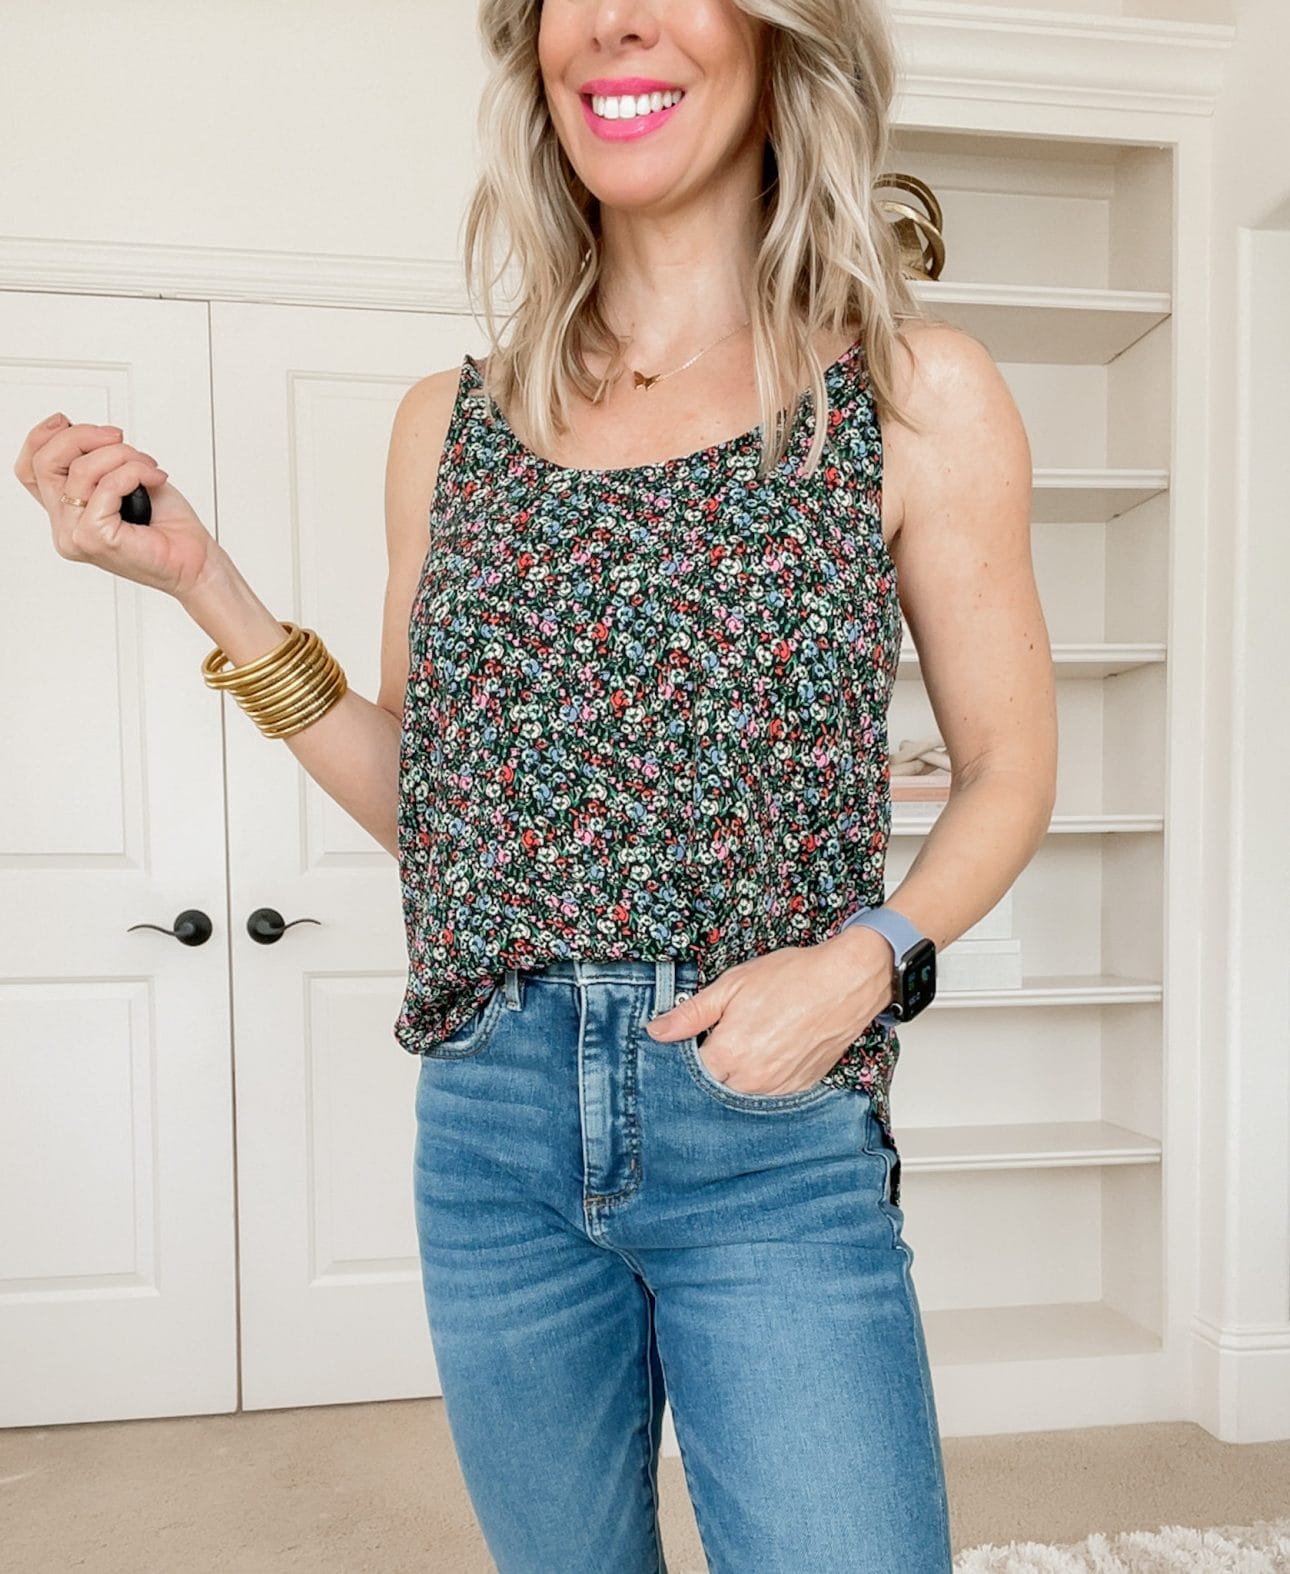 Dressing Room Finds, Floral Tank, Jeans, Wedges, Crossbody 